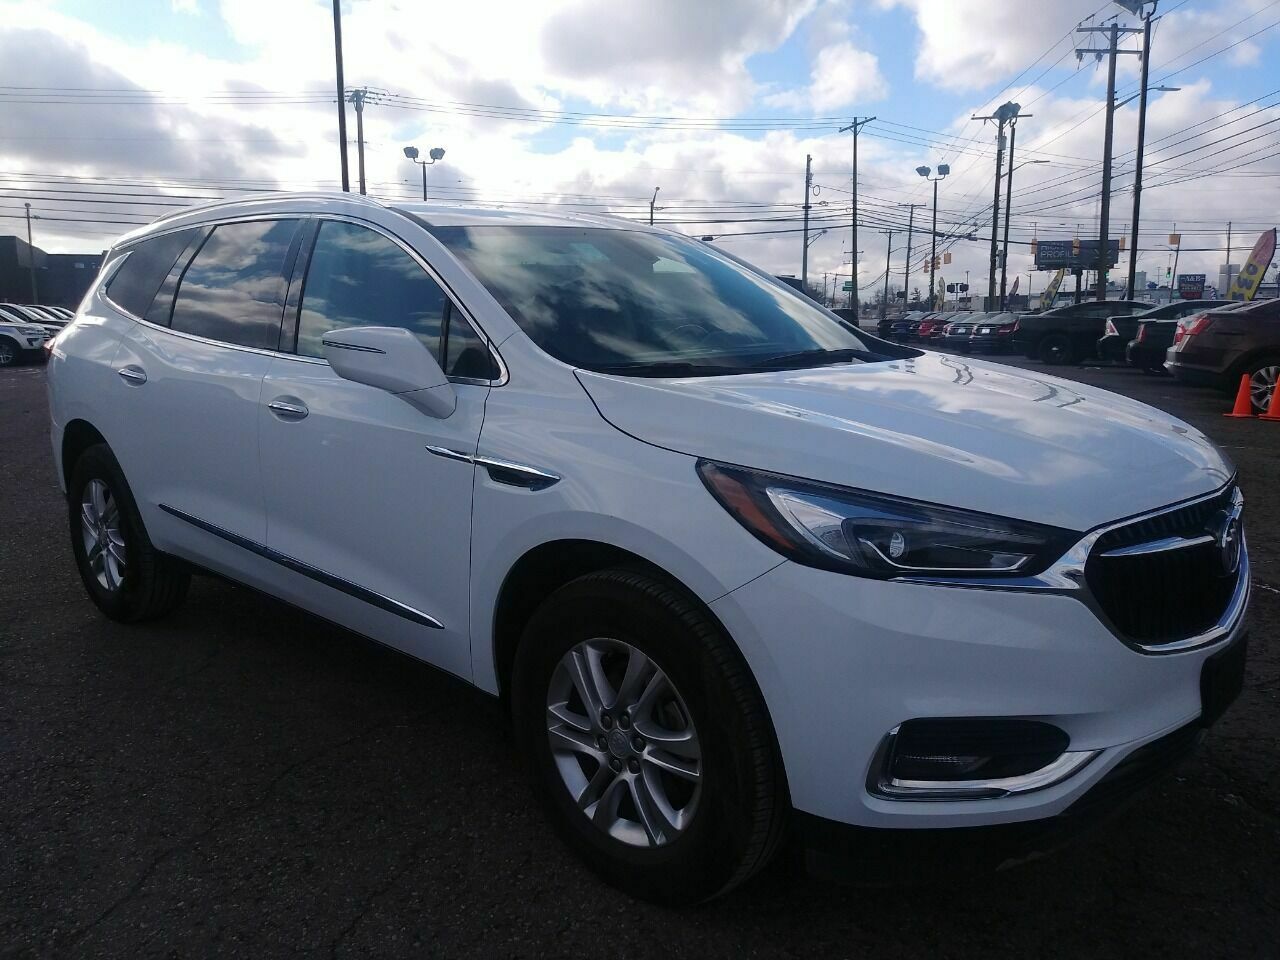 2019 Buick Enclave Essence 4dr Crossover 2019 Buick Enclave Essence 4dr Crossover